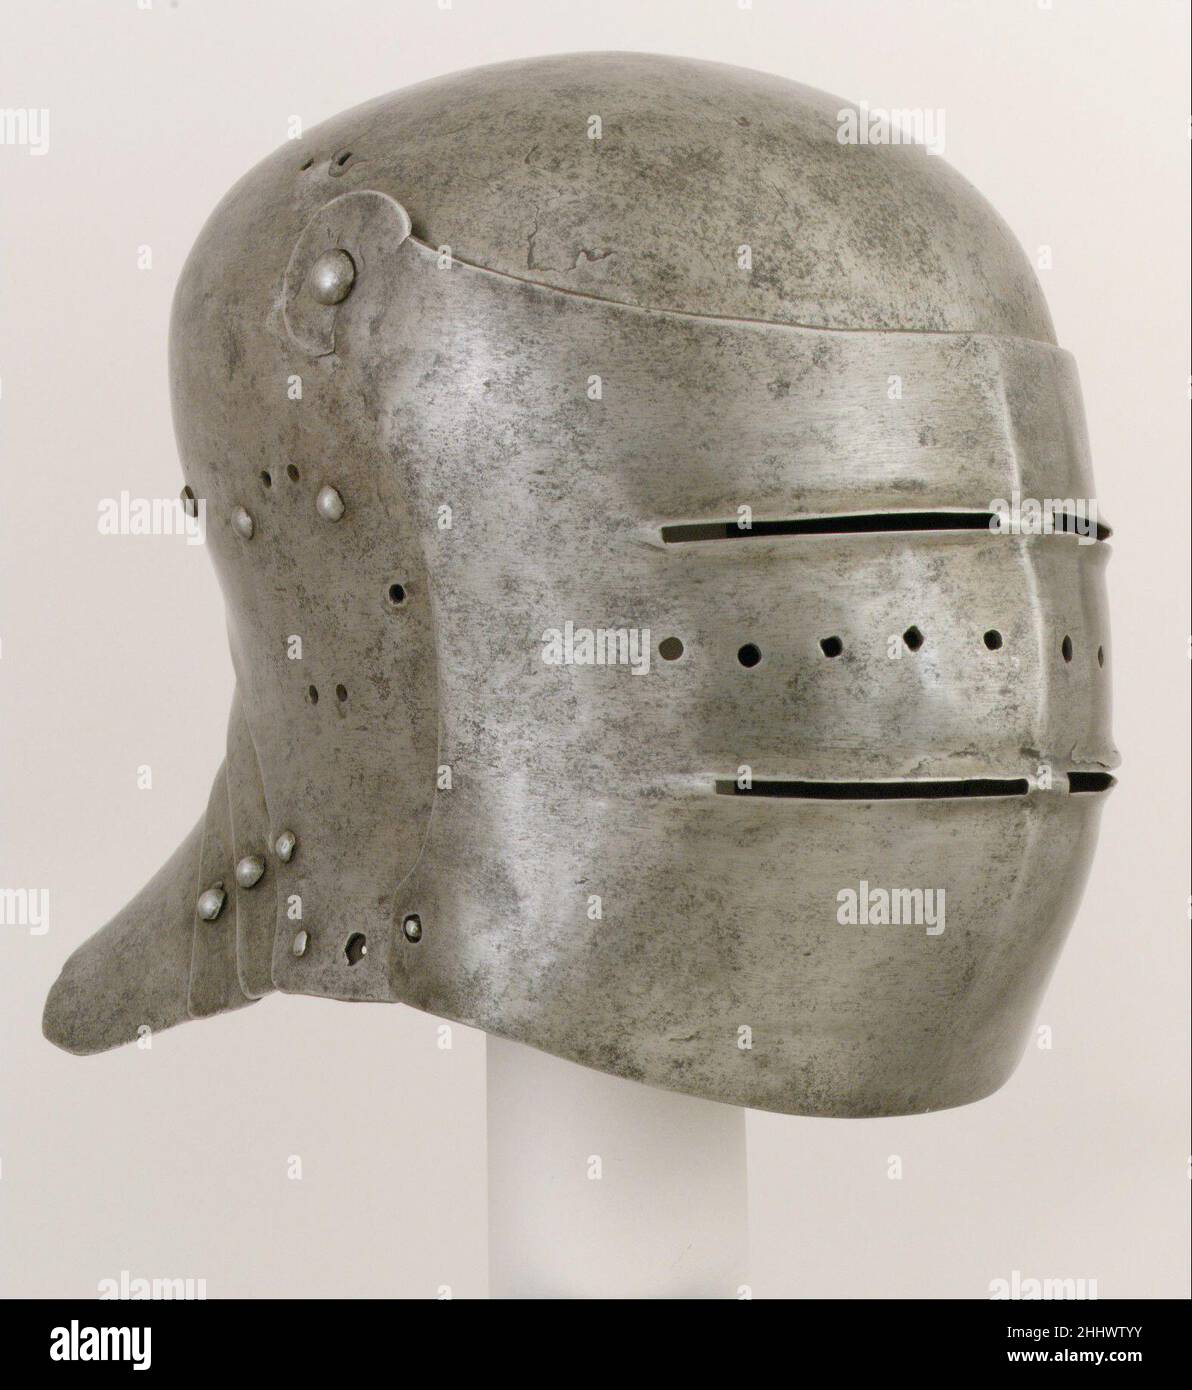 Sallet ca. 1510 German or Austrian, Innsbruck Developing from the late Gothic German sallet, characterized by a horizontal profile and pointed tail, this early-sixteenth-century example has a taller, rounder, and more compact form, a transformation that reflects Italian influence. The large visor, pierced for sight and ventilation, has an unmistakable masklike quality. Pairs of holes at the top and sides of the bowl allowed for the exit of the lining laces, by which the padded lining (now missing) could be adjusted from the outside for a comfortable fit. A similar sallet in the Museum's collec Stock Photo